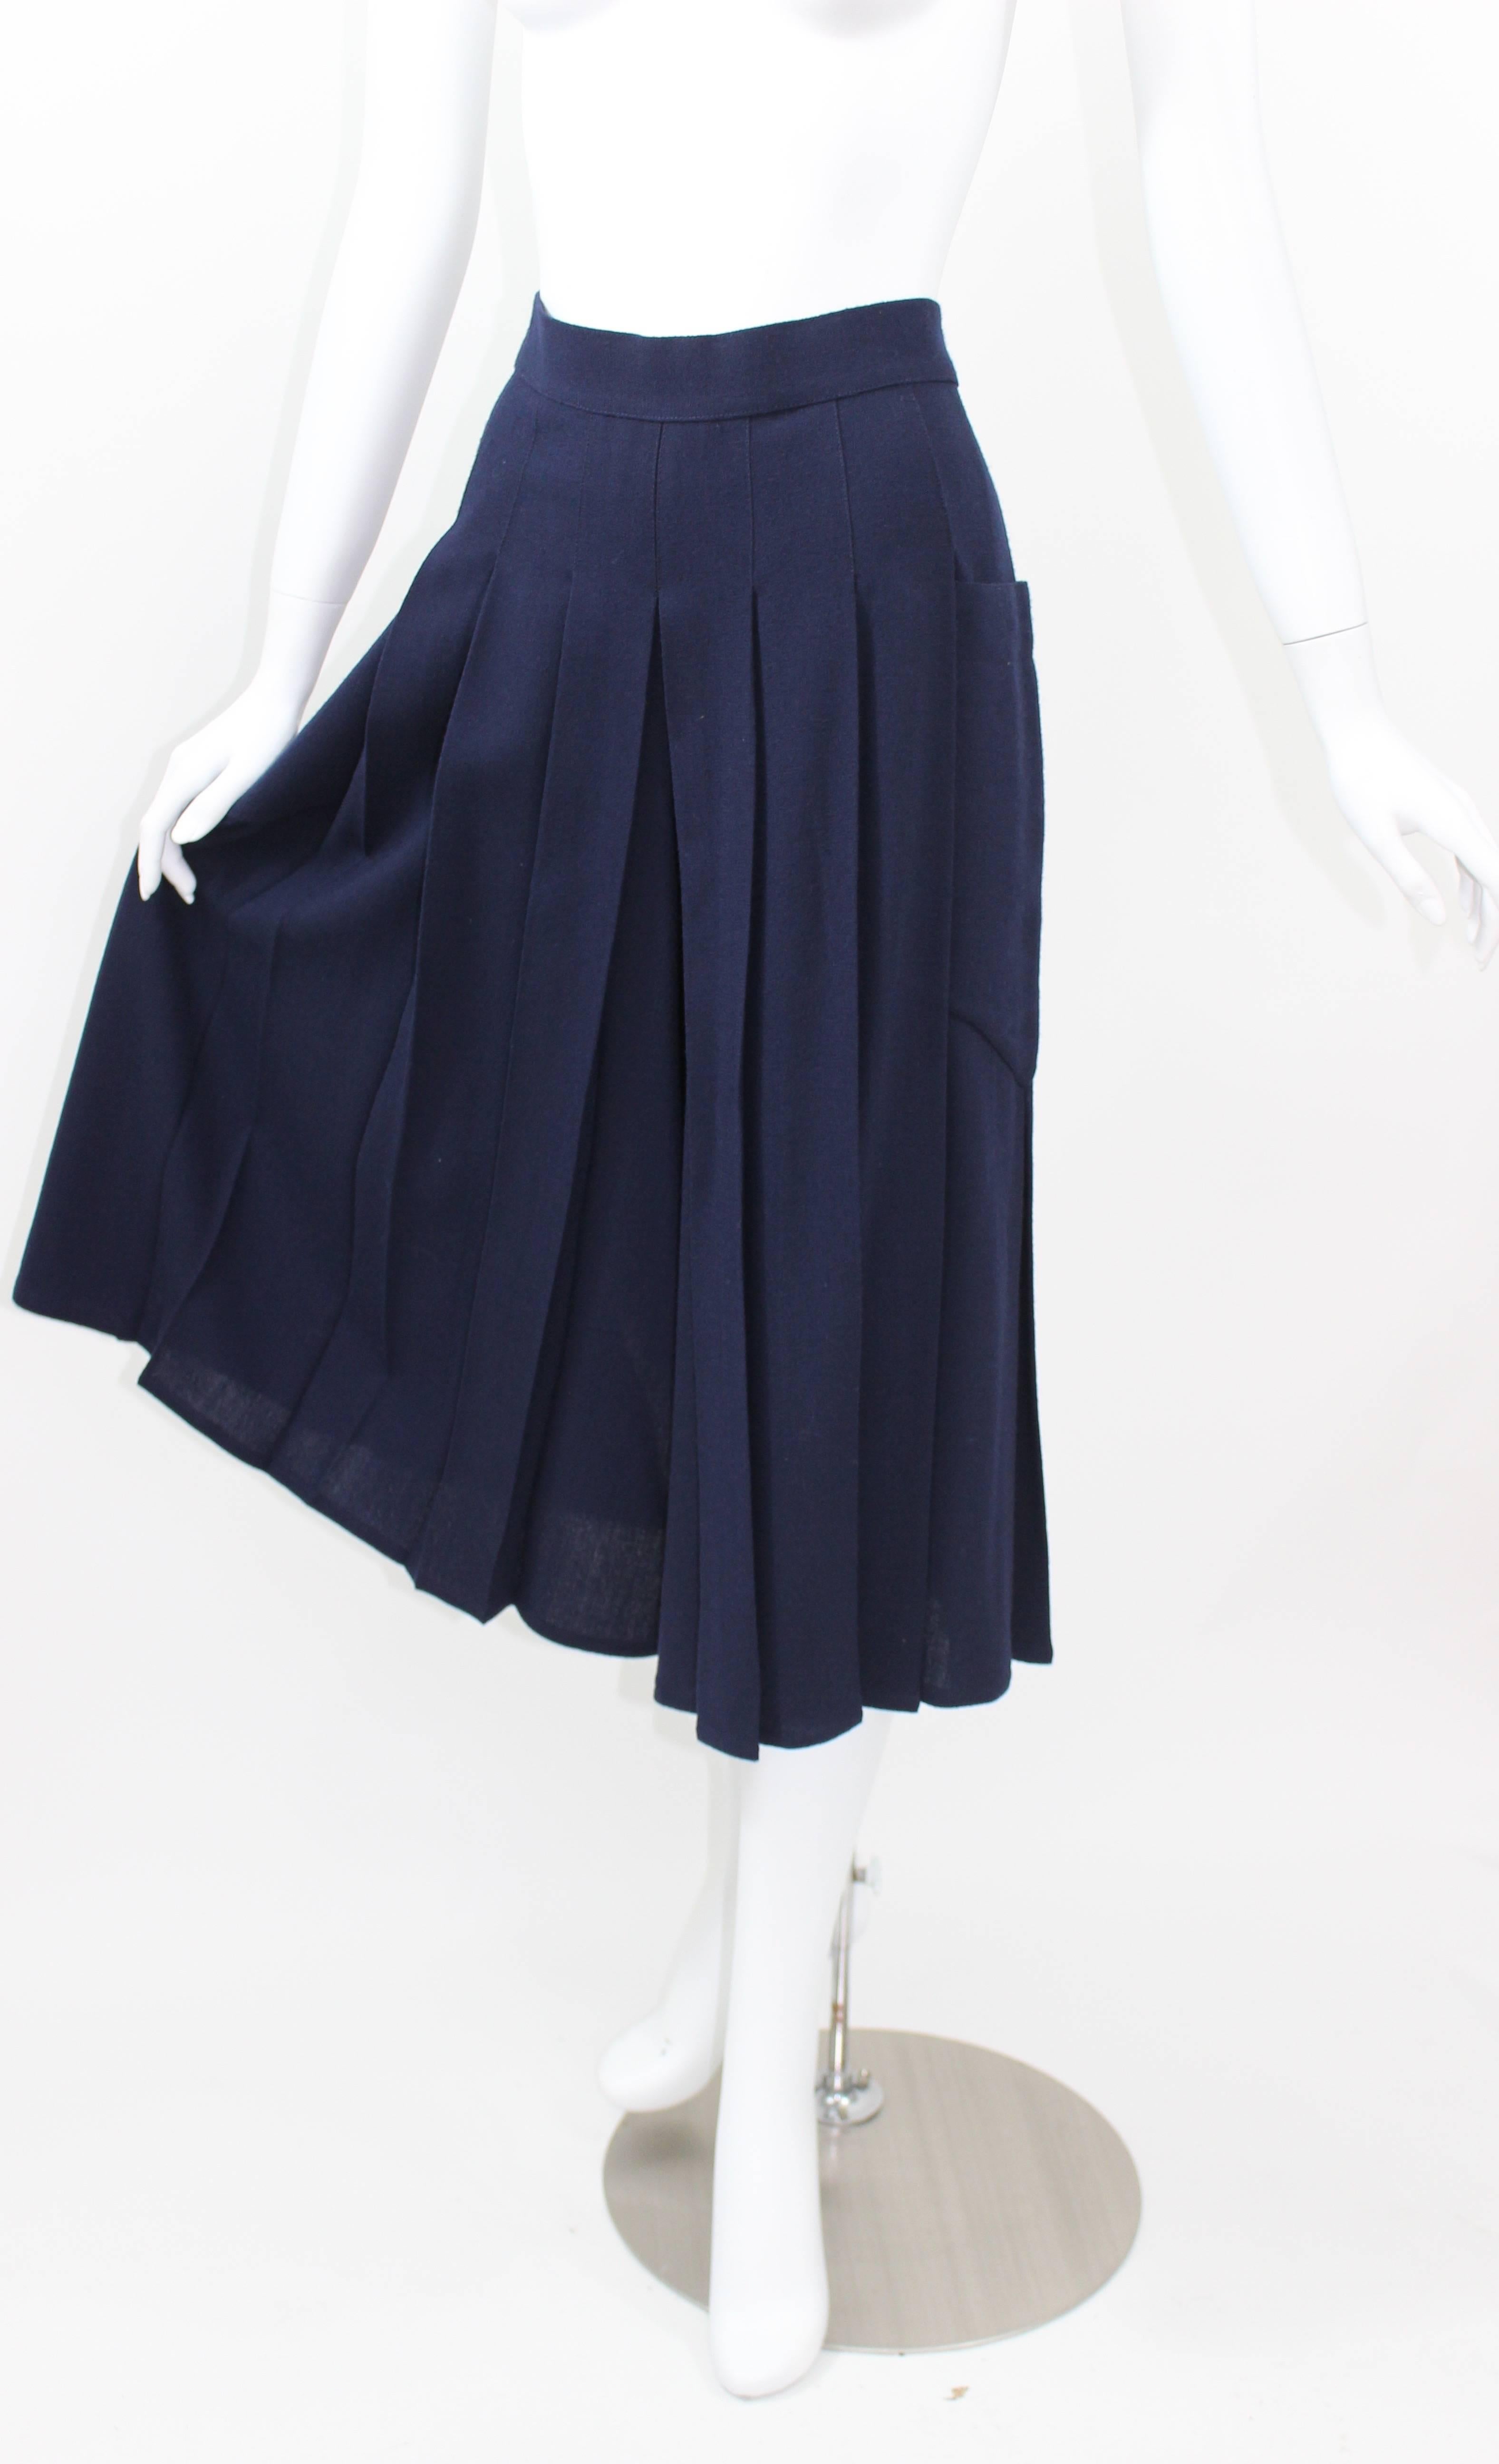 Vintage Chloe Karl Lagerfeld Navy Crepe Jacket Culottes/ Gaucho Pant Set In Excellent Condition For Sale In Boca Raton, FL